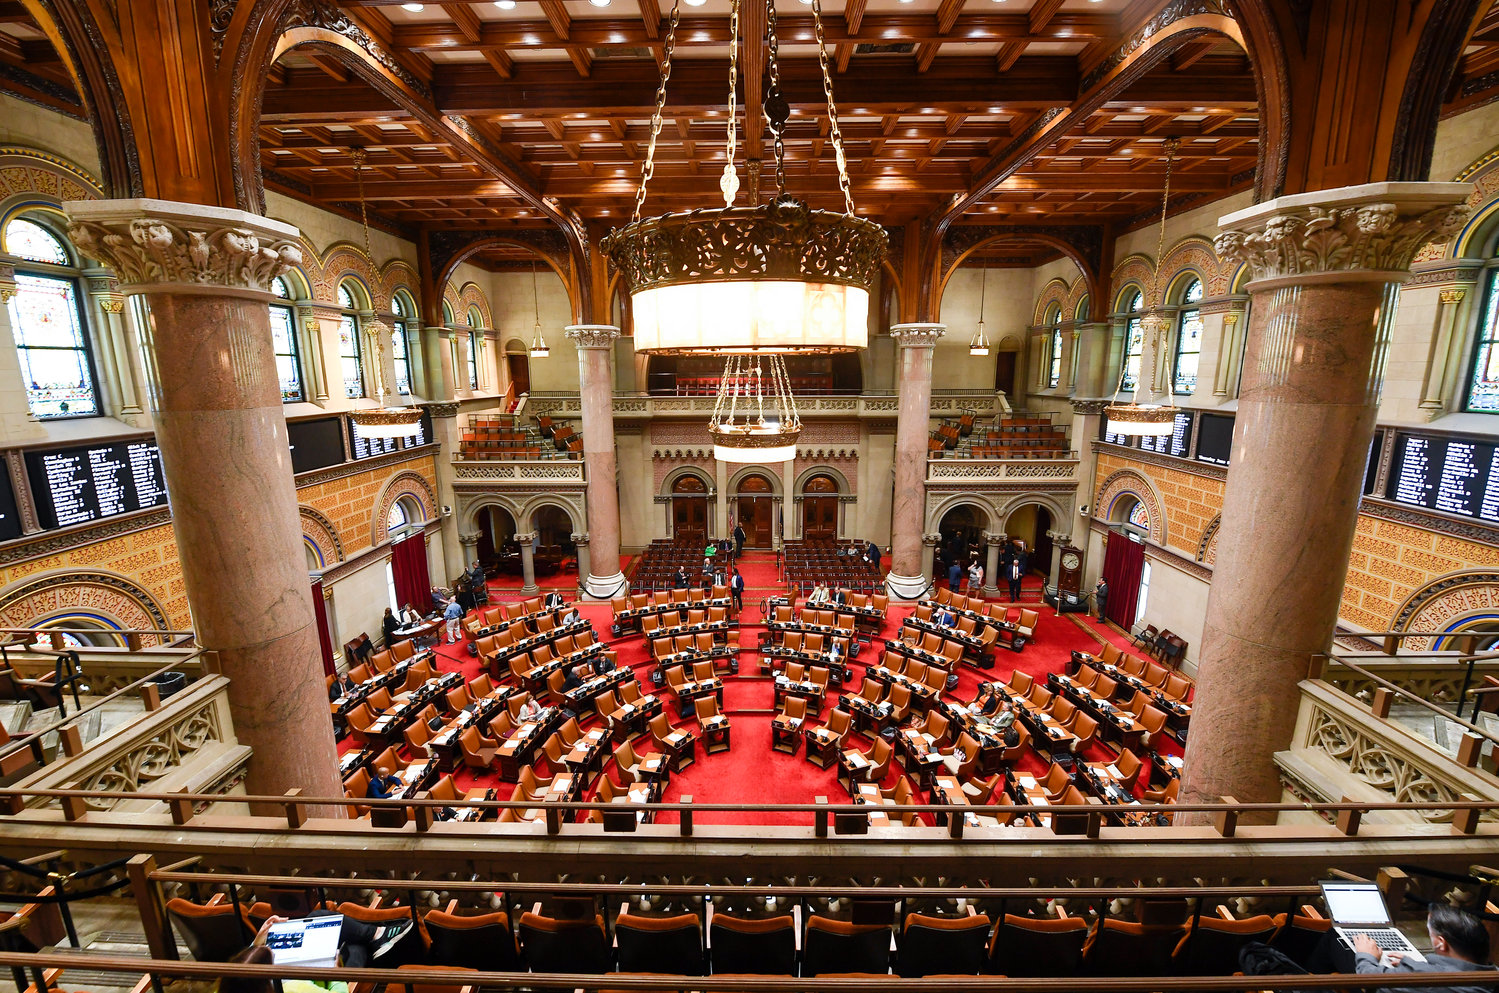 The Assembly Chamber is pictured during a legislative session at the state Capitol on the last scheduled day of the 2022 legislative session Thursday, June 2, 2022, in Albany, N.Y. (AP Photo/Hans Pennink)